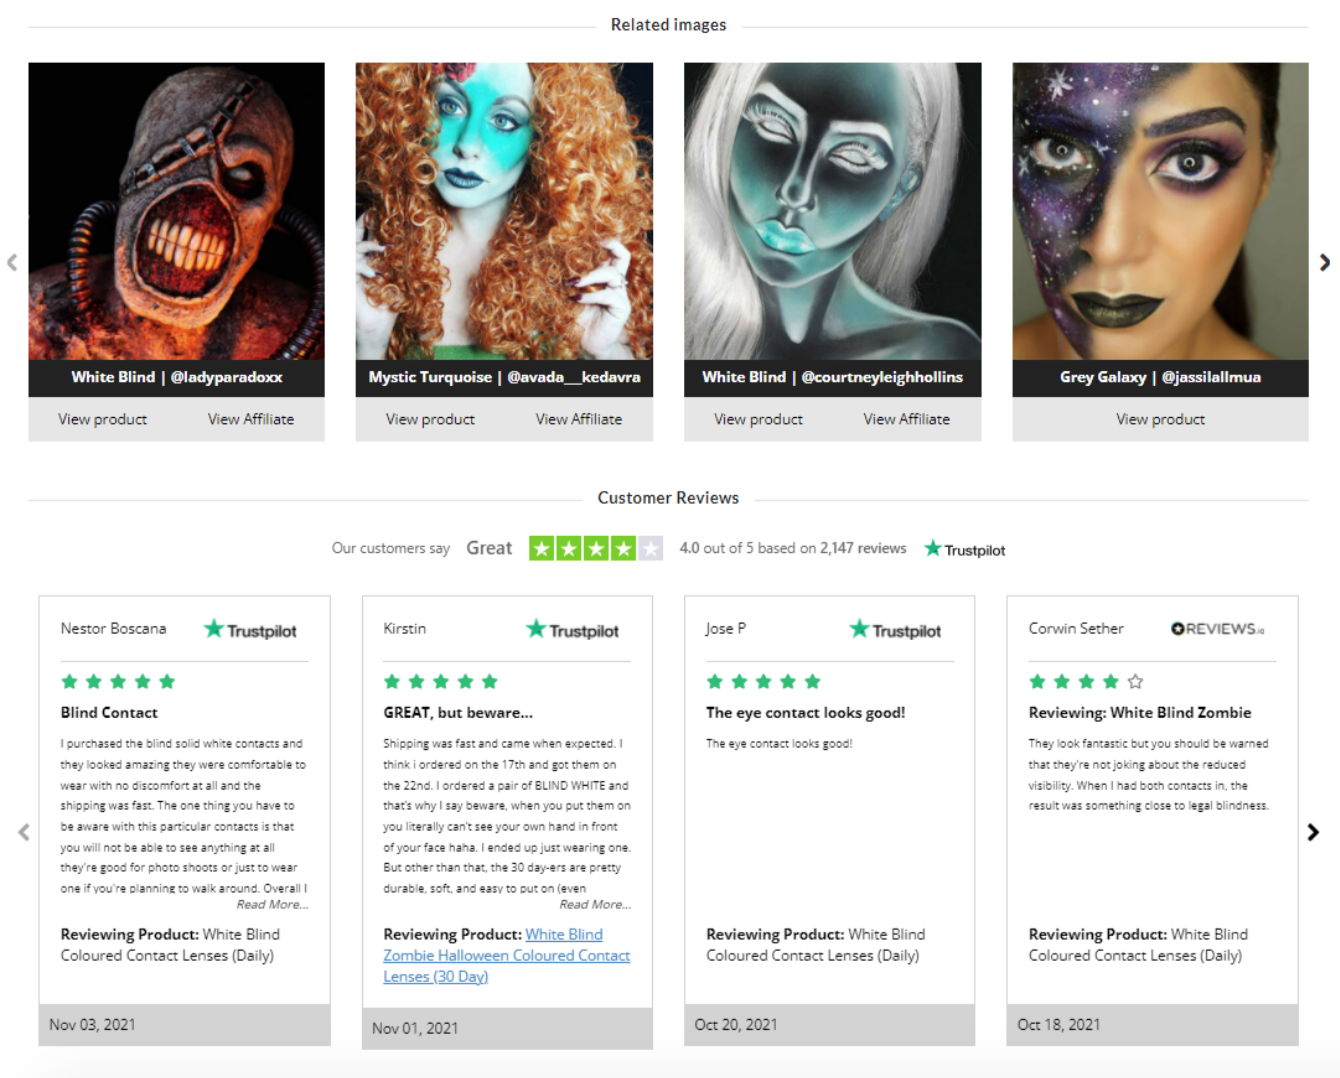 ColouredContacts online store uses customer reviews